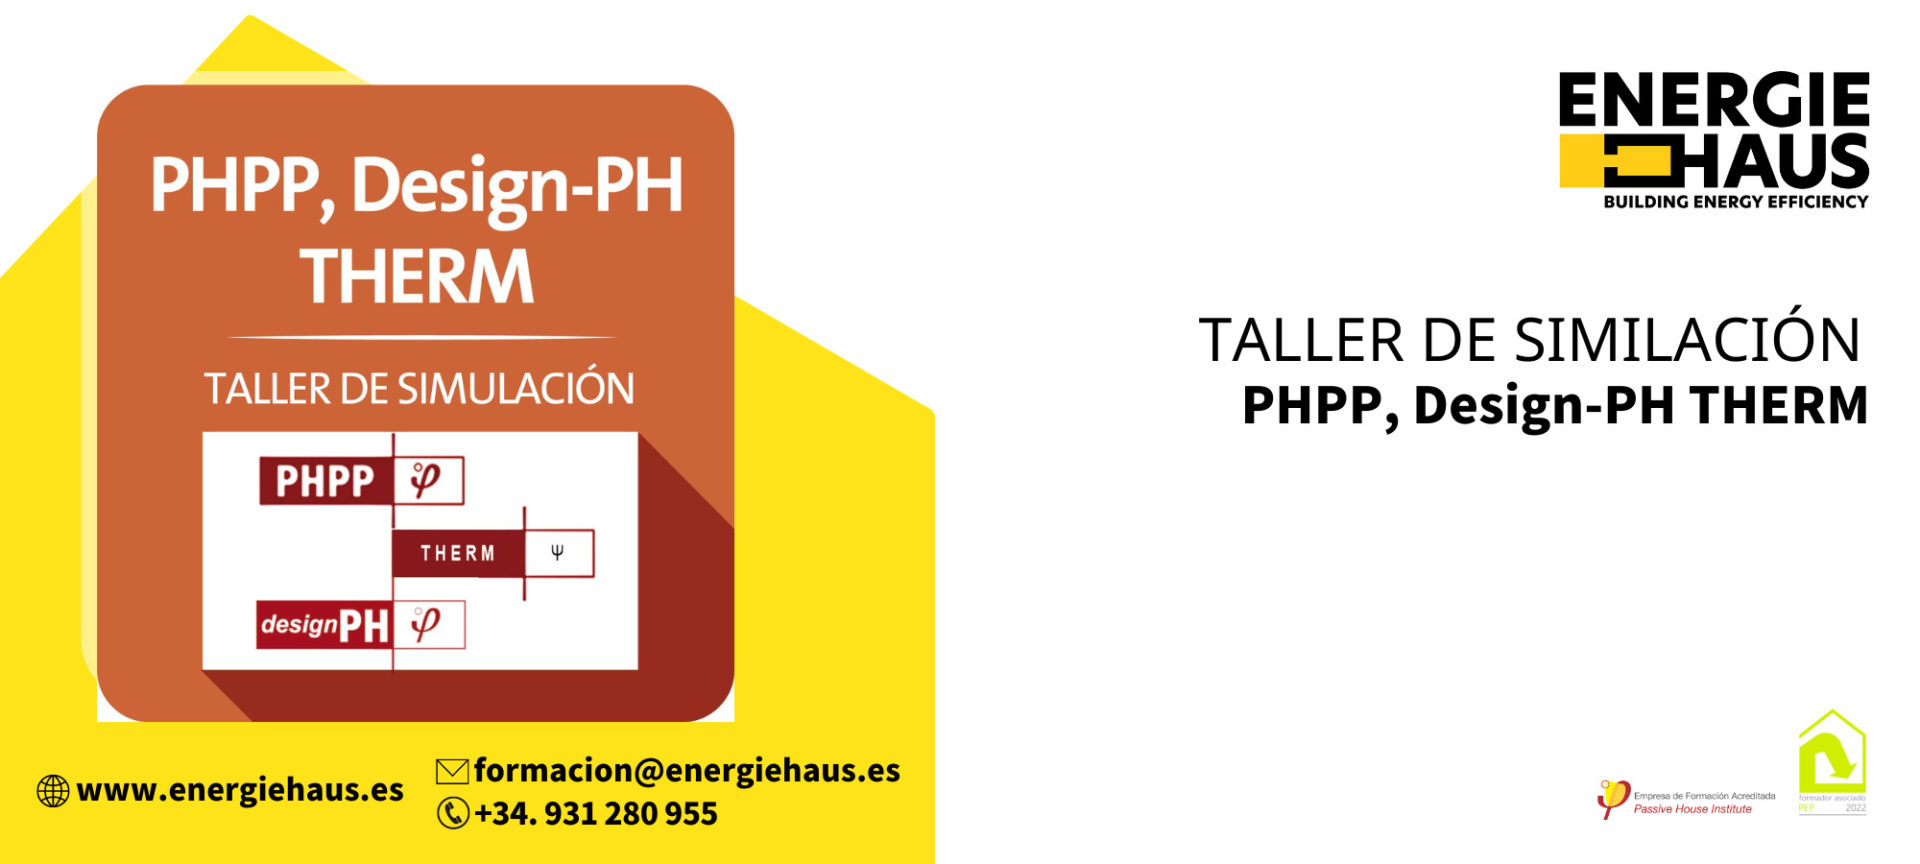 Energiehaus: CURSO Taller PHPP / Design-PH / THERM - 100% online (streaming)